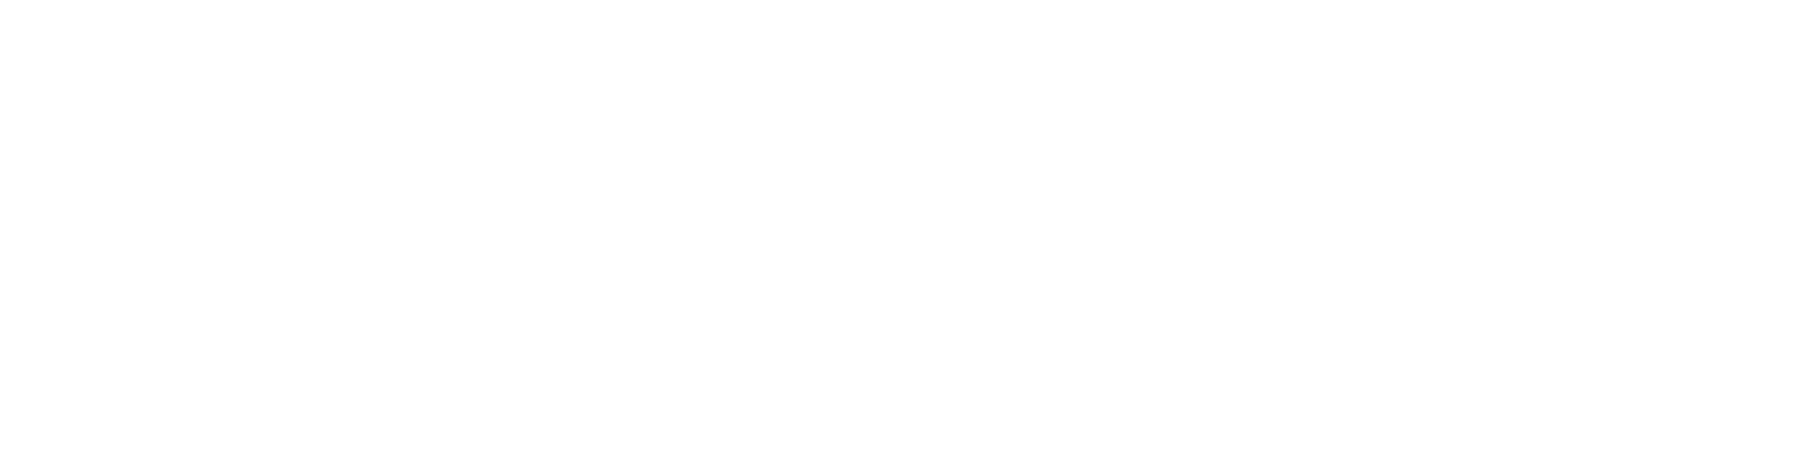 Download event services logo Horizontal in white